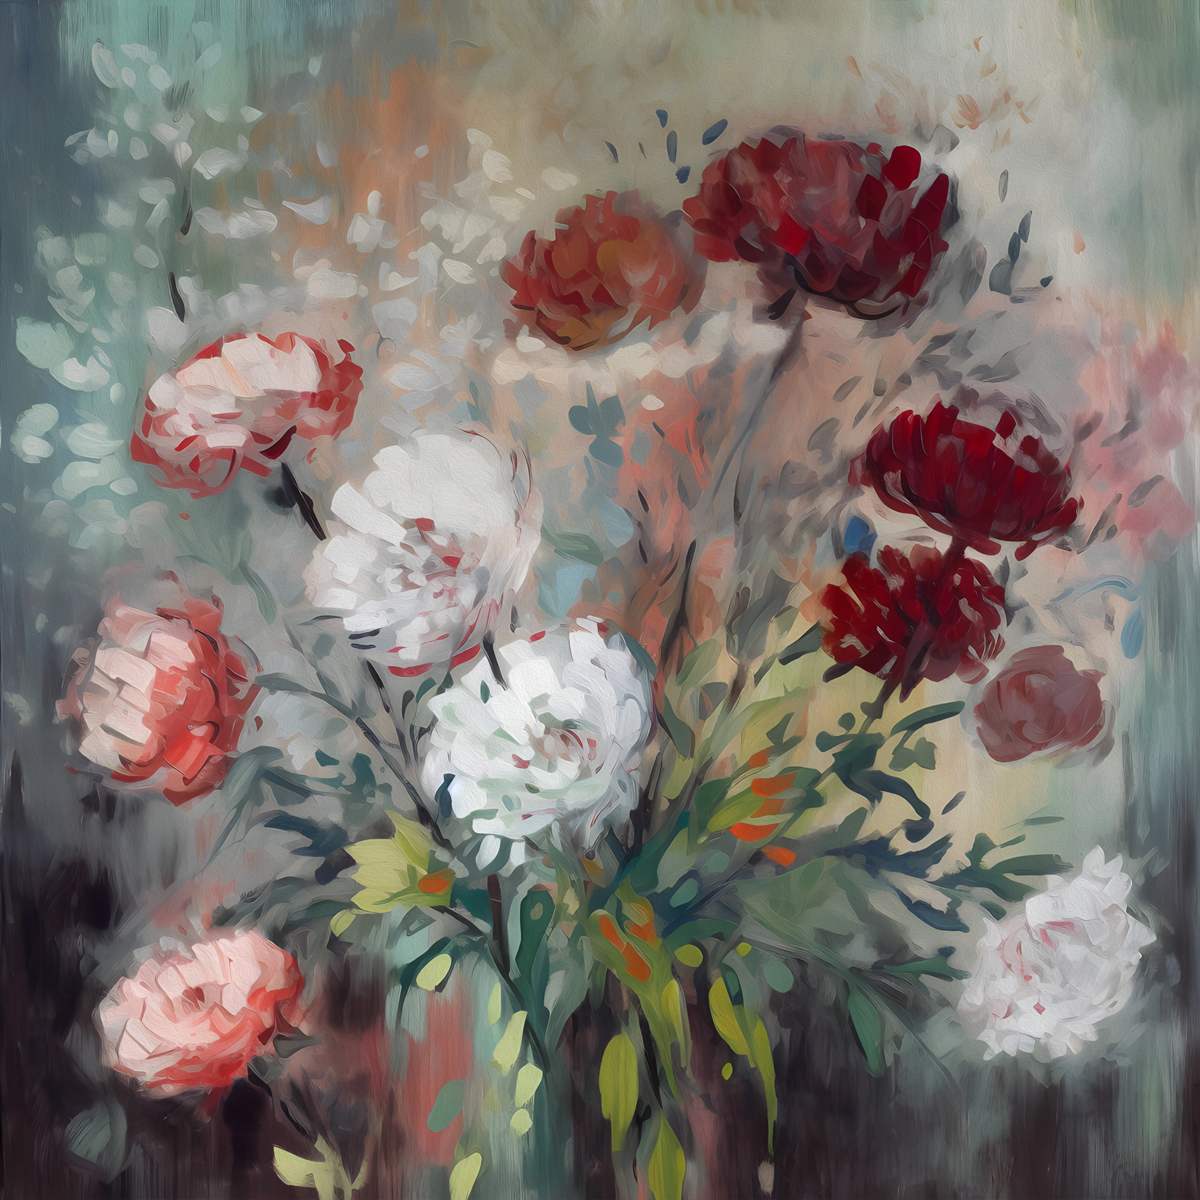  Romantic Blooms: 'Red, Pink, And White Flowers' Art Collection - Art Print on Canvas. Artemyst